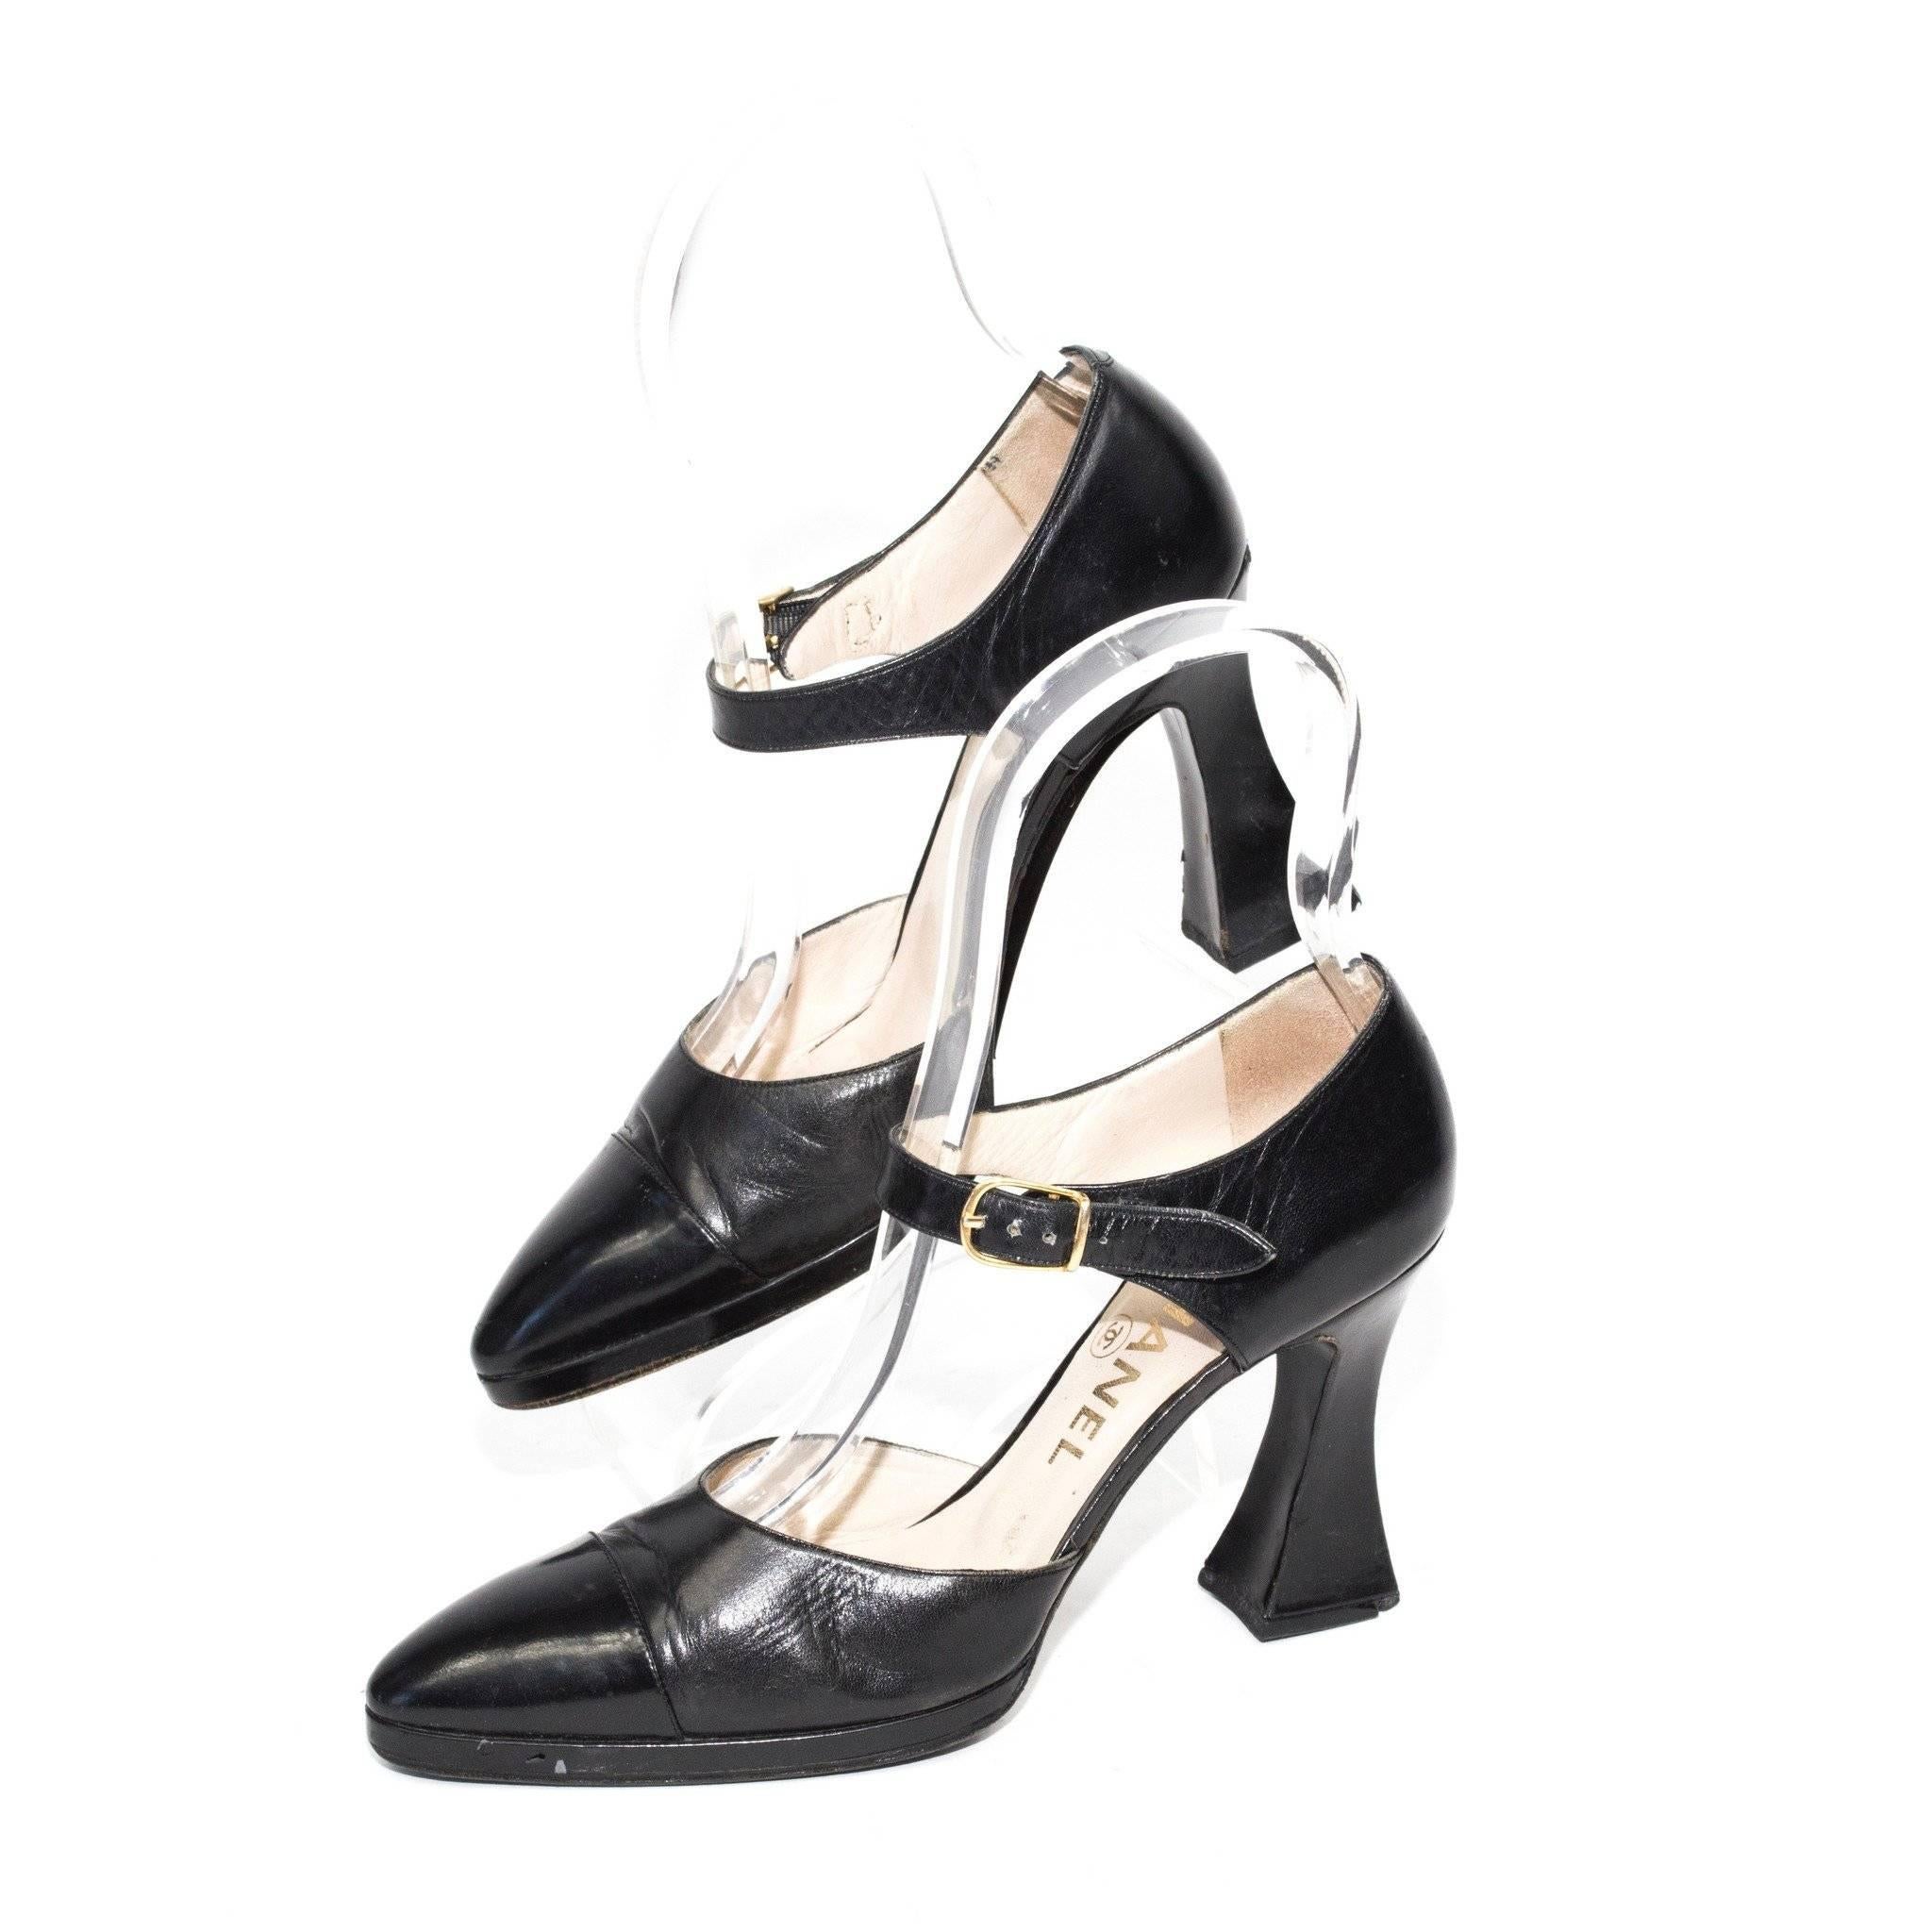 Chanel 1990's Black Patent Leather Cap Toe Heels with Ankle Strap and a Stacked Heel.

Size 37

3 Inch Heel

In fair condition, some wear and nicks on the right heel.